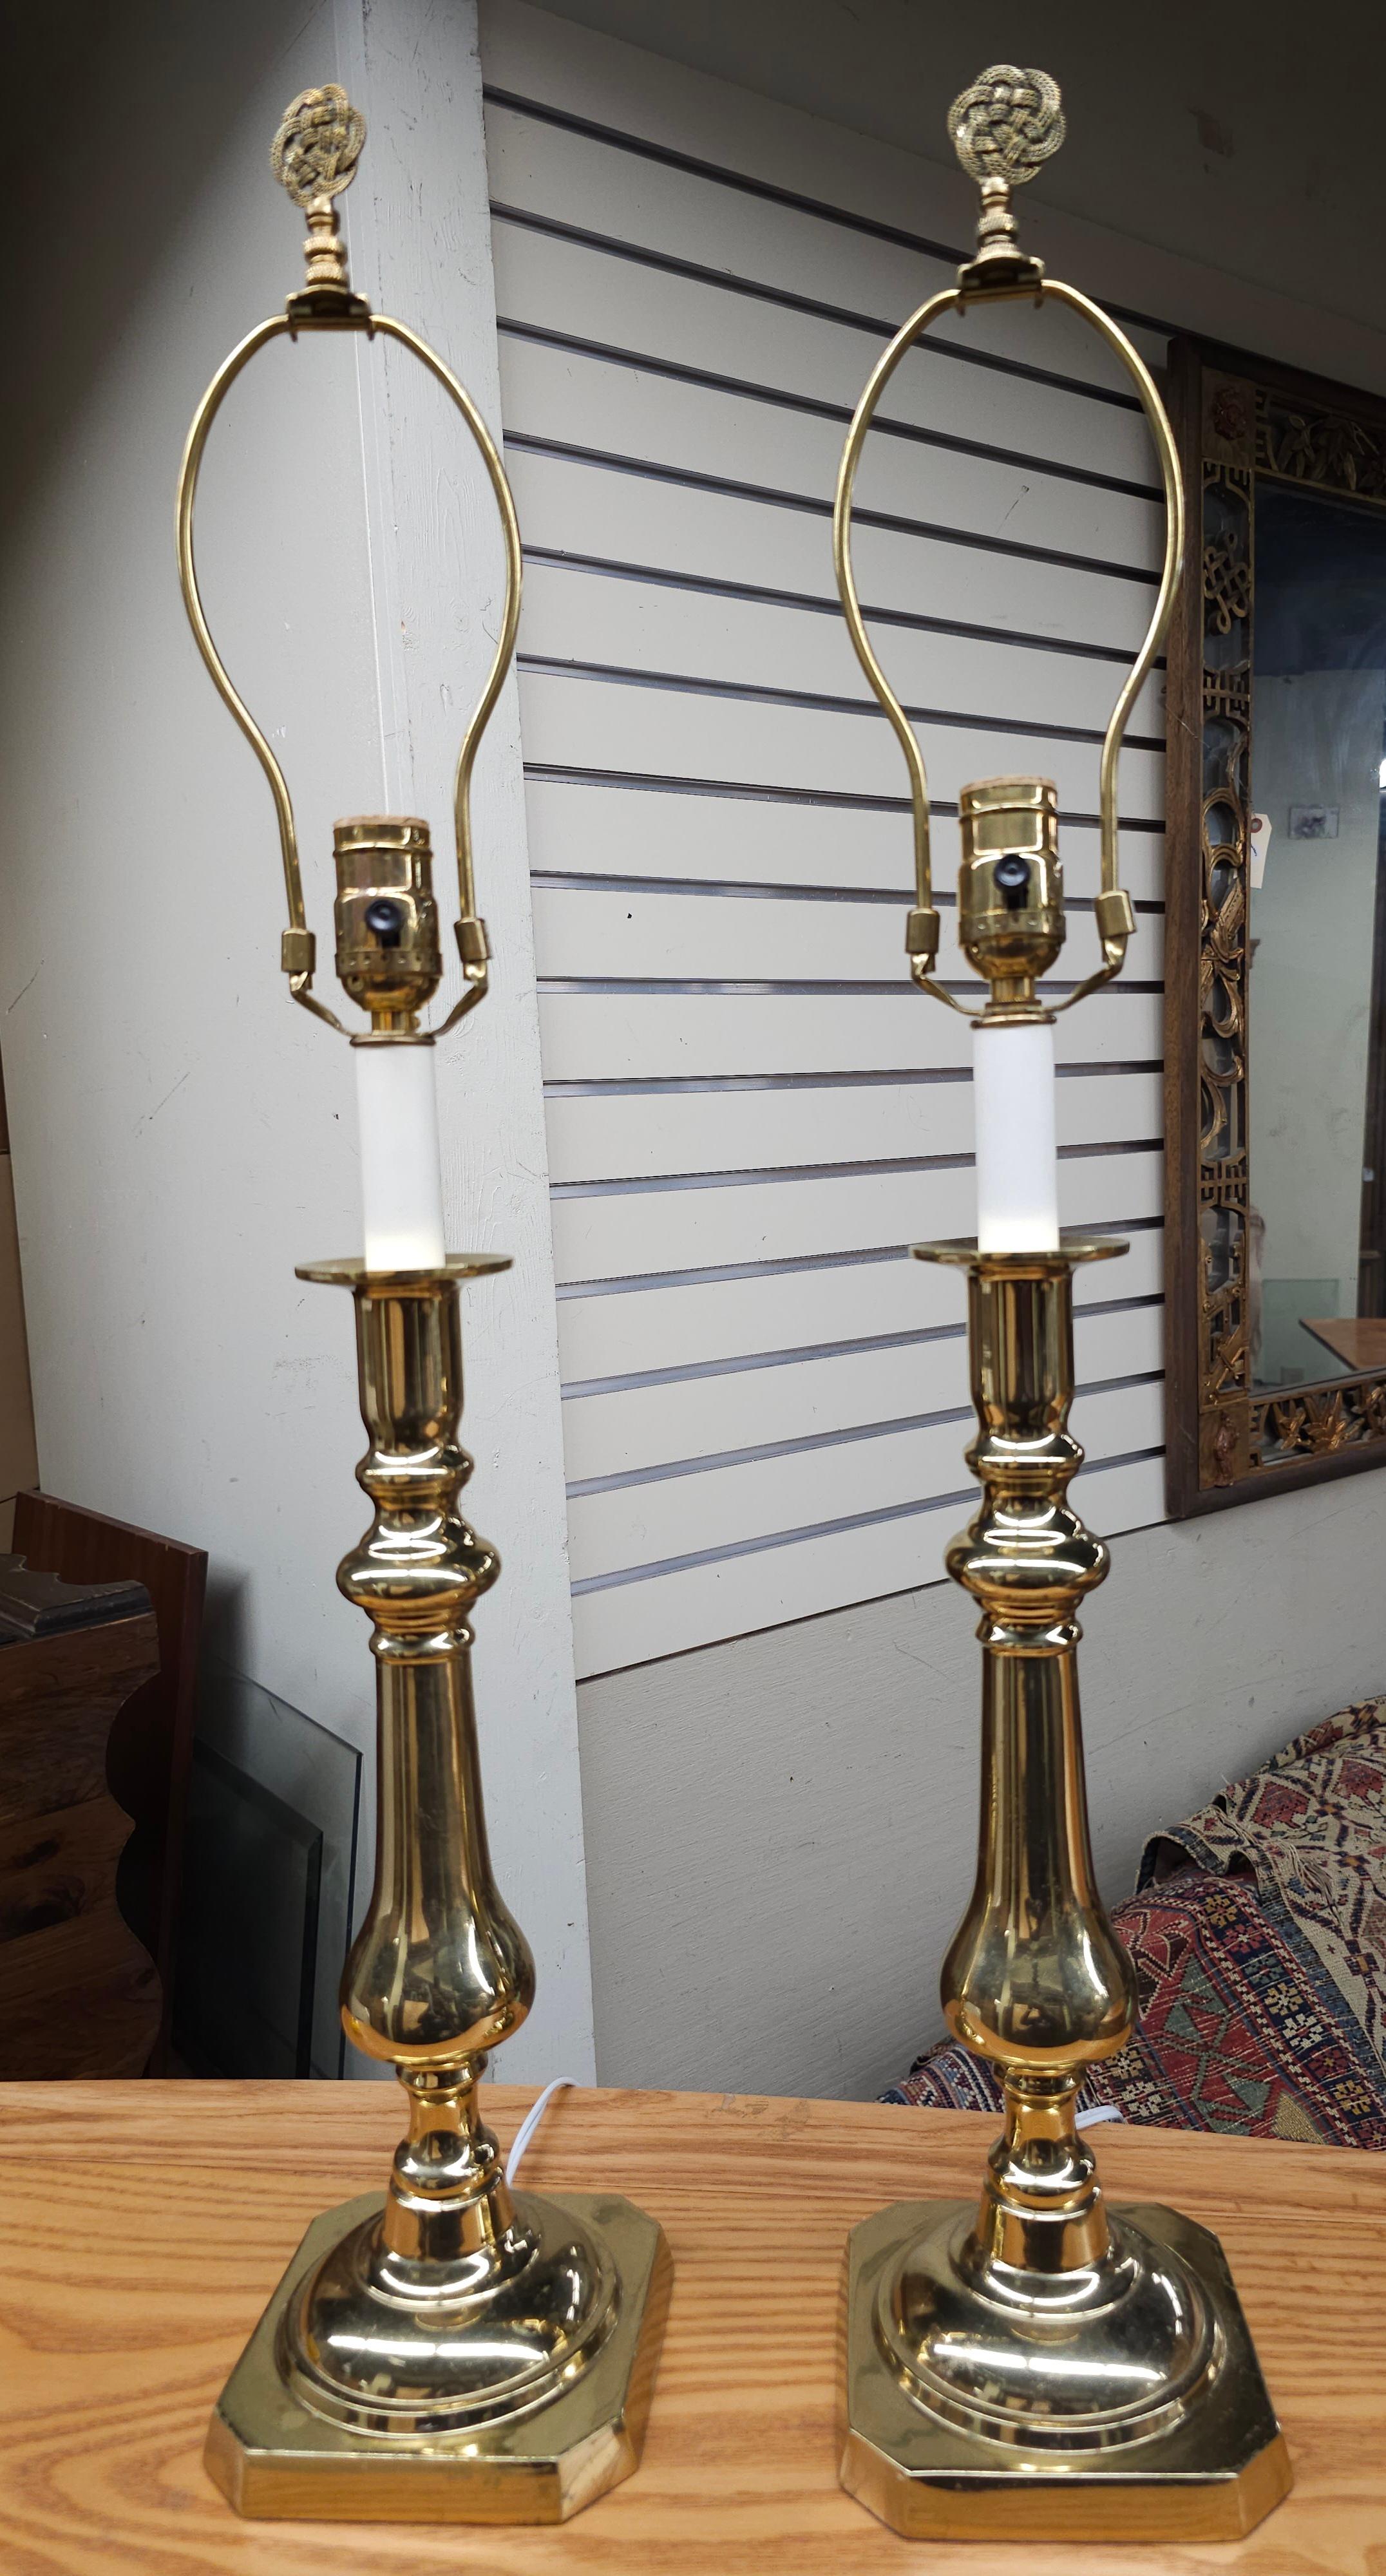 A pair of Virginia MetalCrafters Solid Polished Brass Candle Stick Table Lamps with harp and finials. Measure 5.5